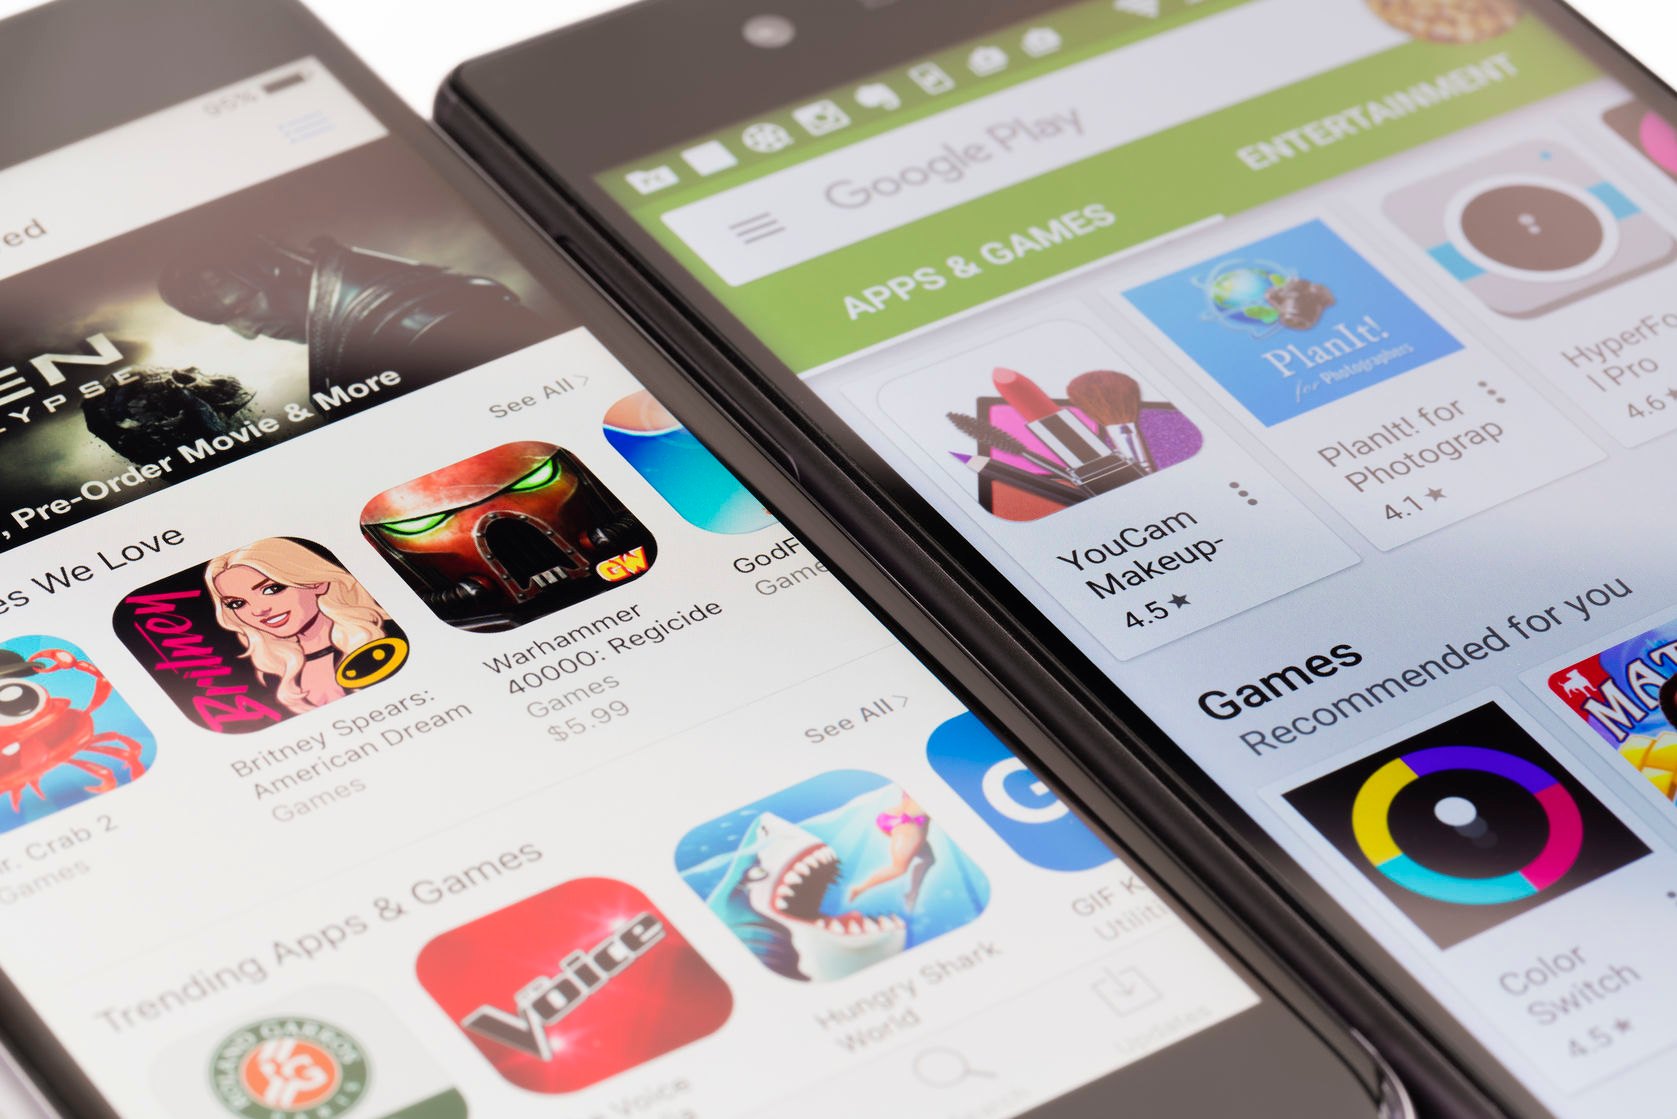 Learn How To Buy Games In The Play Store